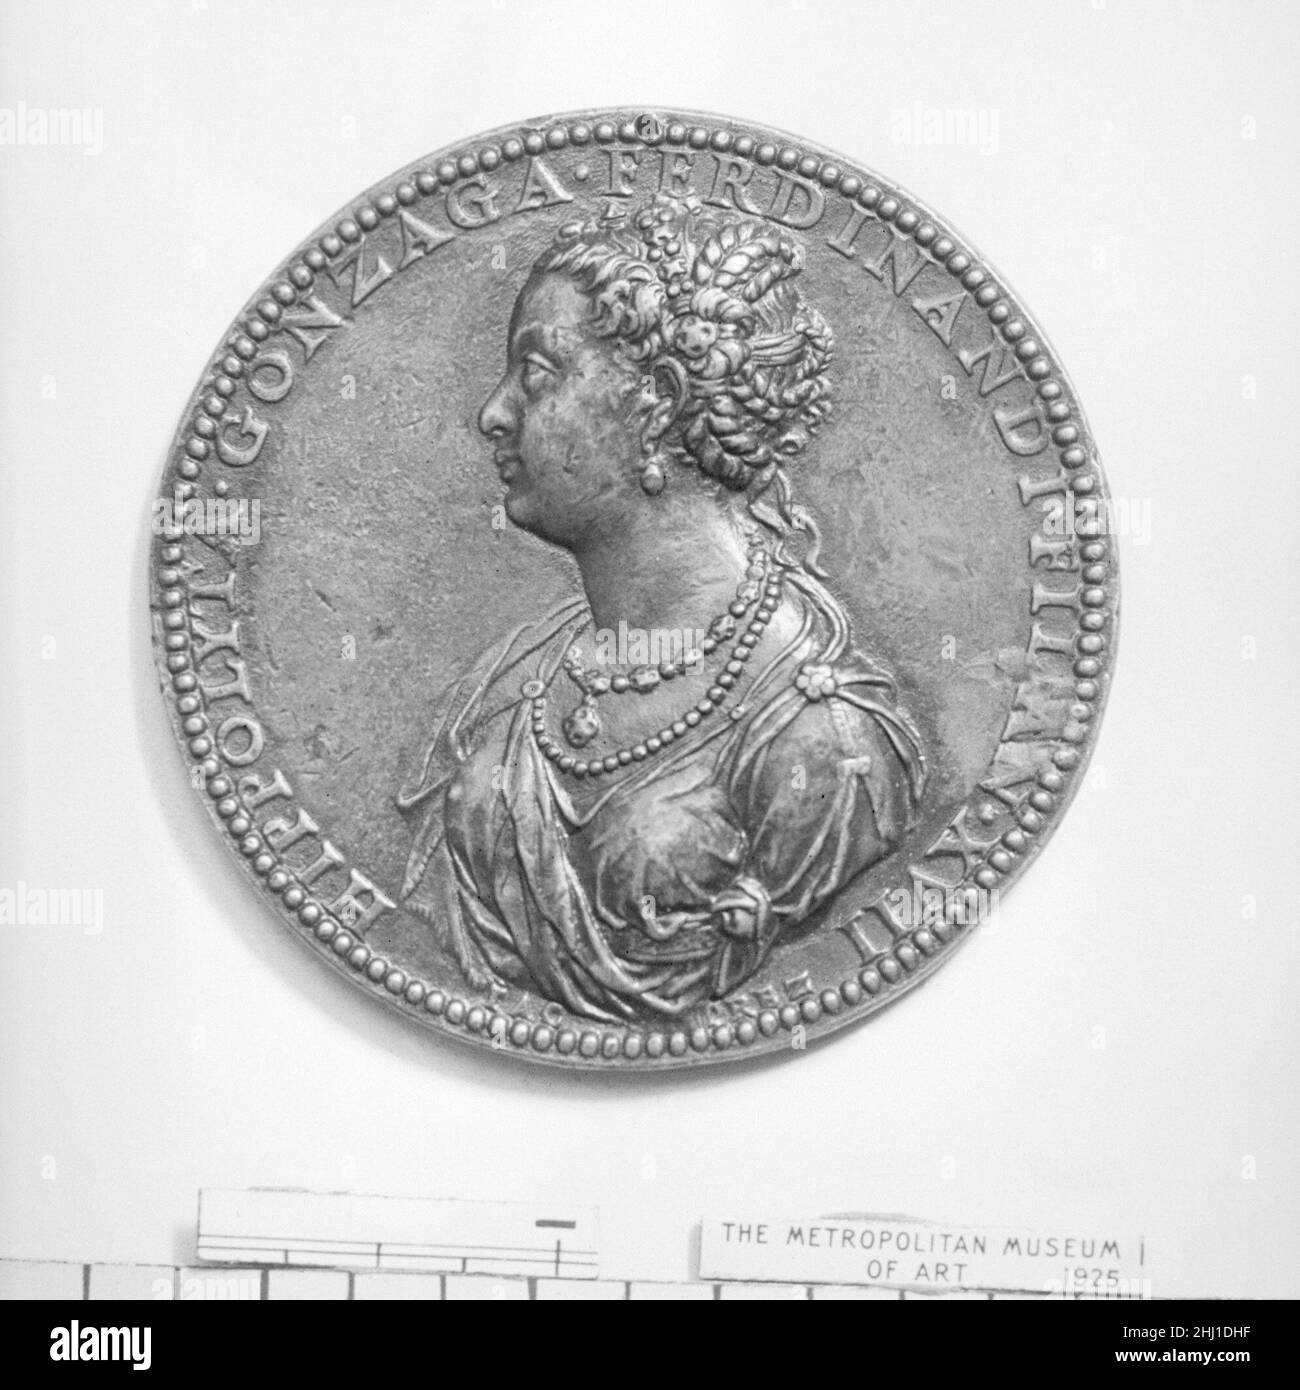 Ippolita Gonzaga (1535–1563), at the age of 17 1552–53 Medalist: Jacopo Nizolla da Trezzo Italian Jacopo was trained as a gem engraver, sculptor, and architect. In addition to making portrait medals of prominent Milanese individuals, he engraved germs and fabricated objects in precious and semi-precious stones for Cosimo I, the duke of Florence.. Ippolita Gonzaga (1535–1563), at the age of 17  195403 Stock Photo